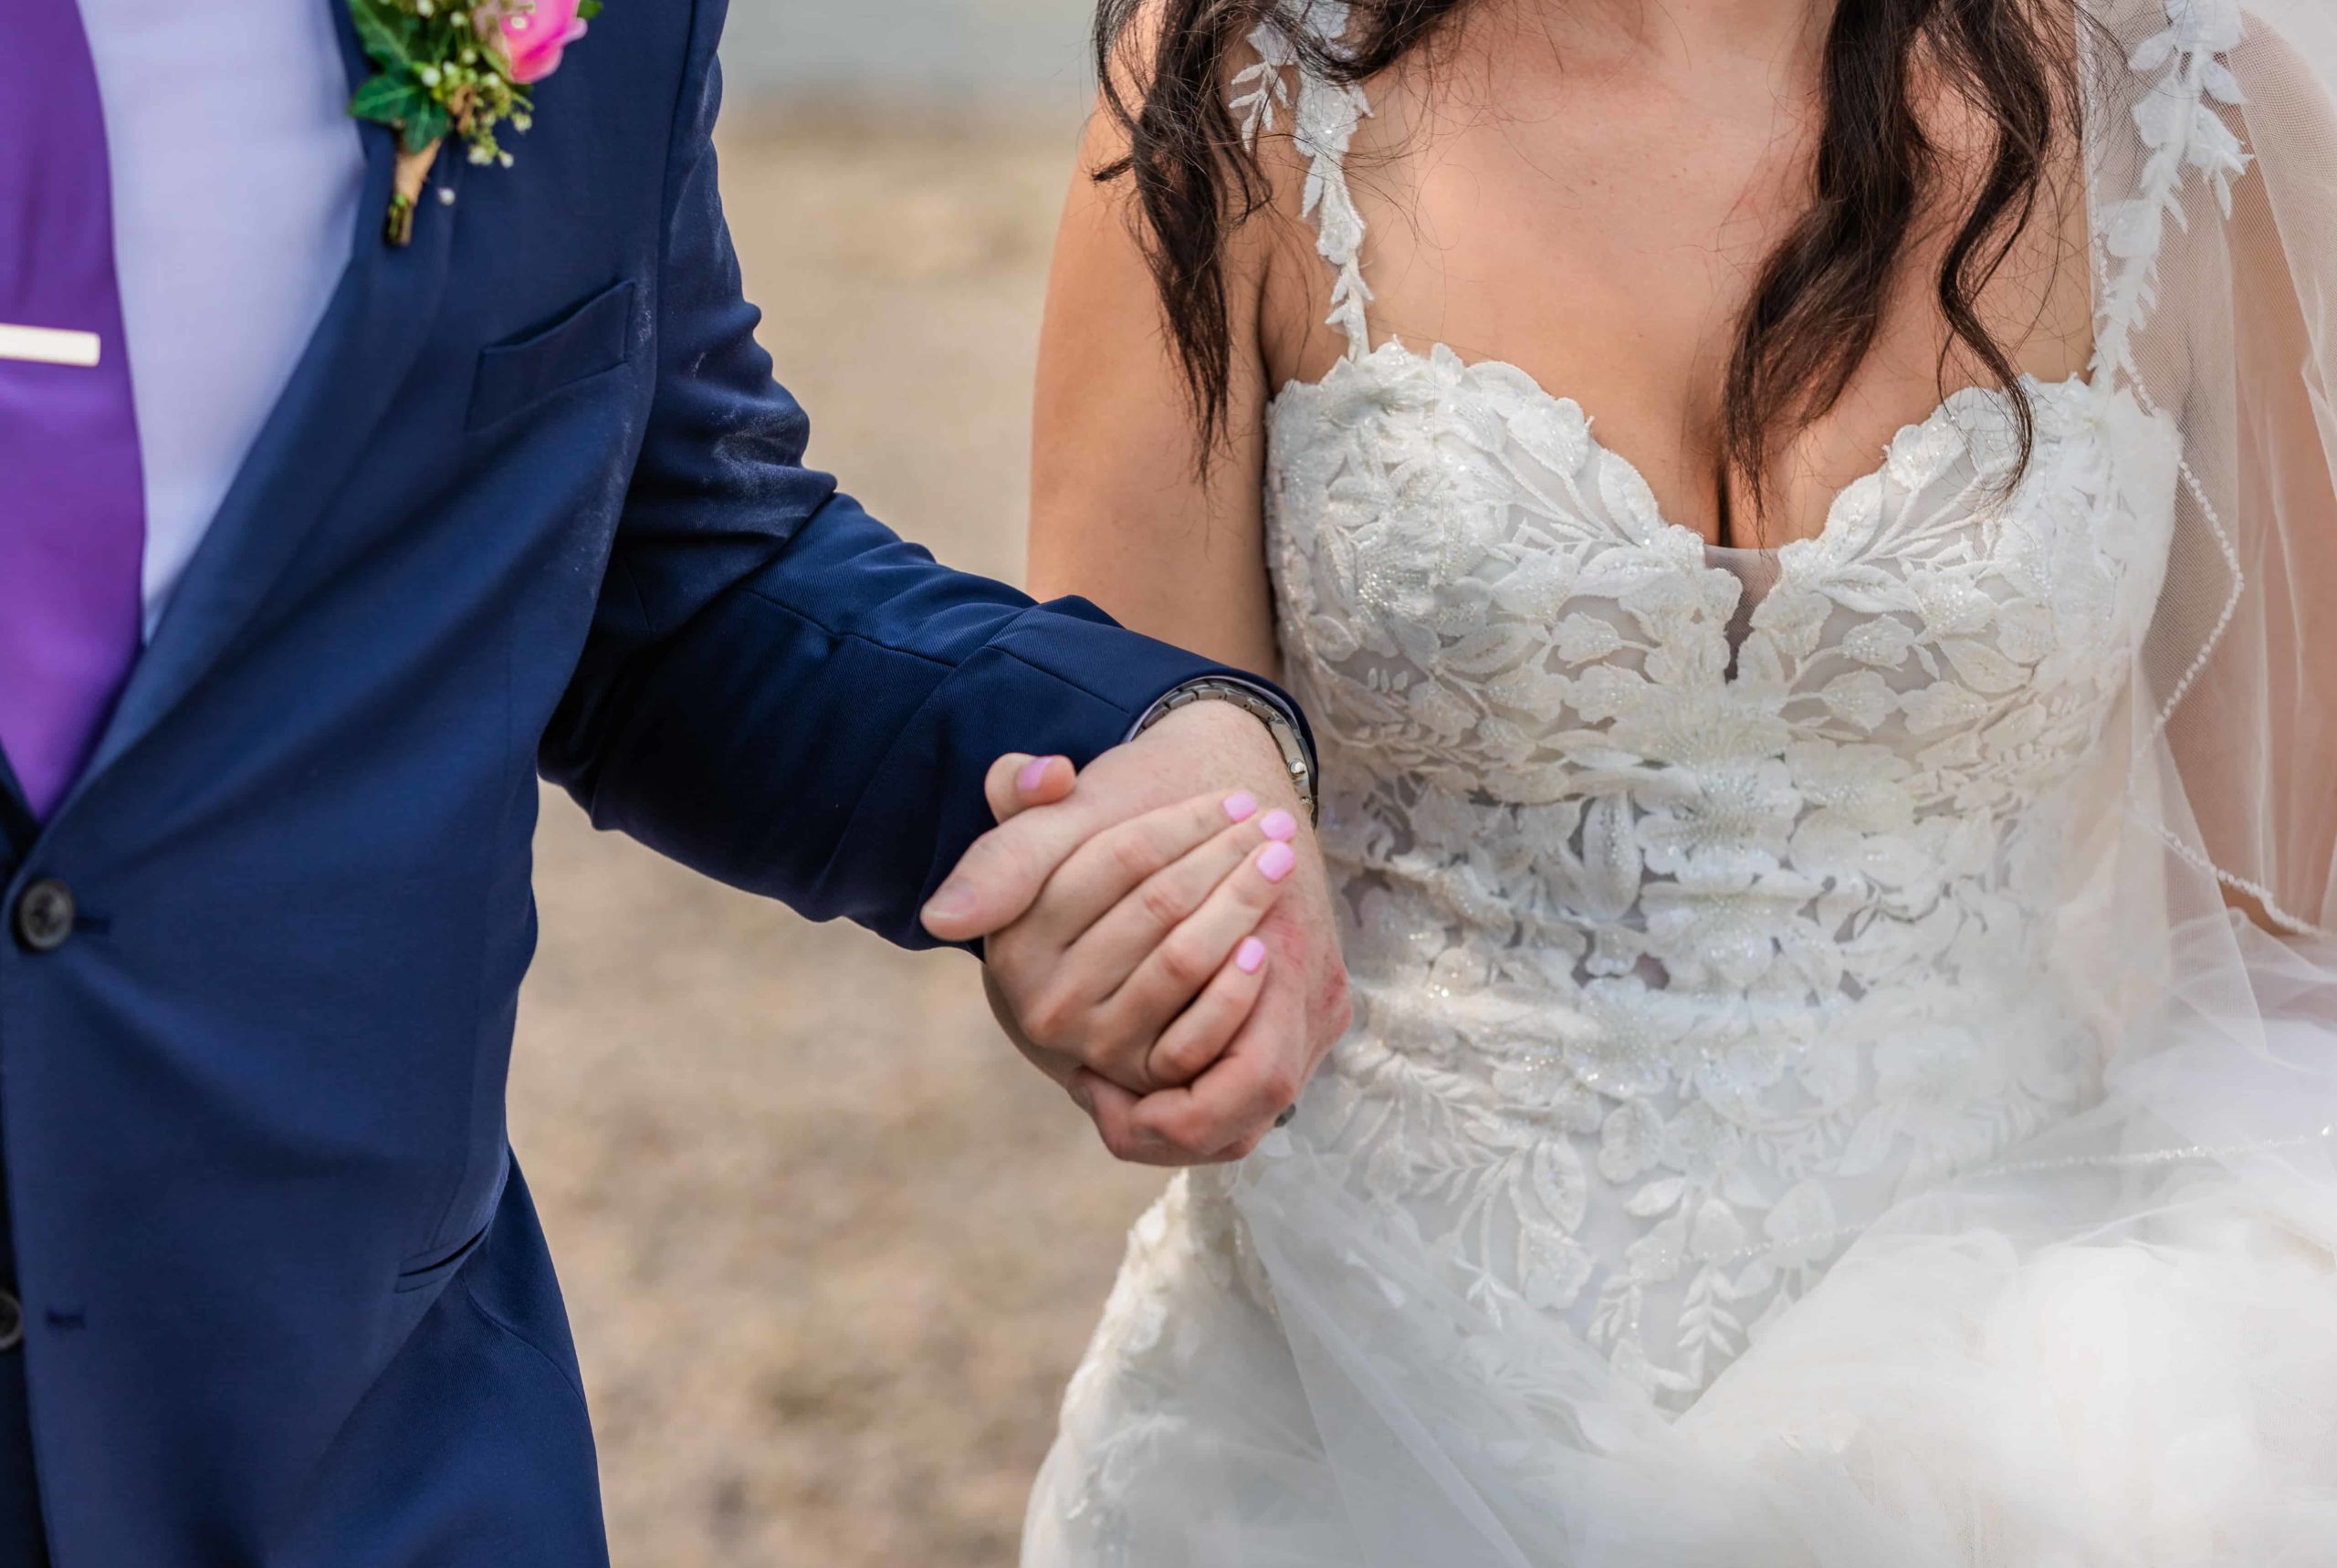 Jackson Hole wedding photographer captures close up of bride and groom's hands